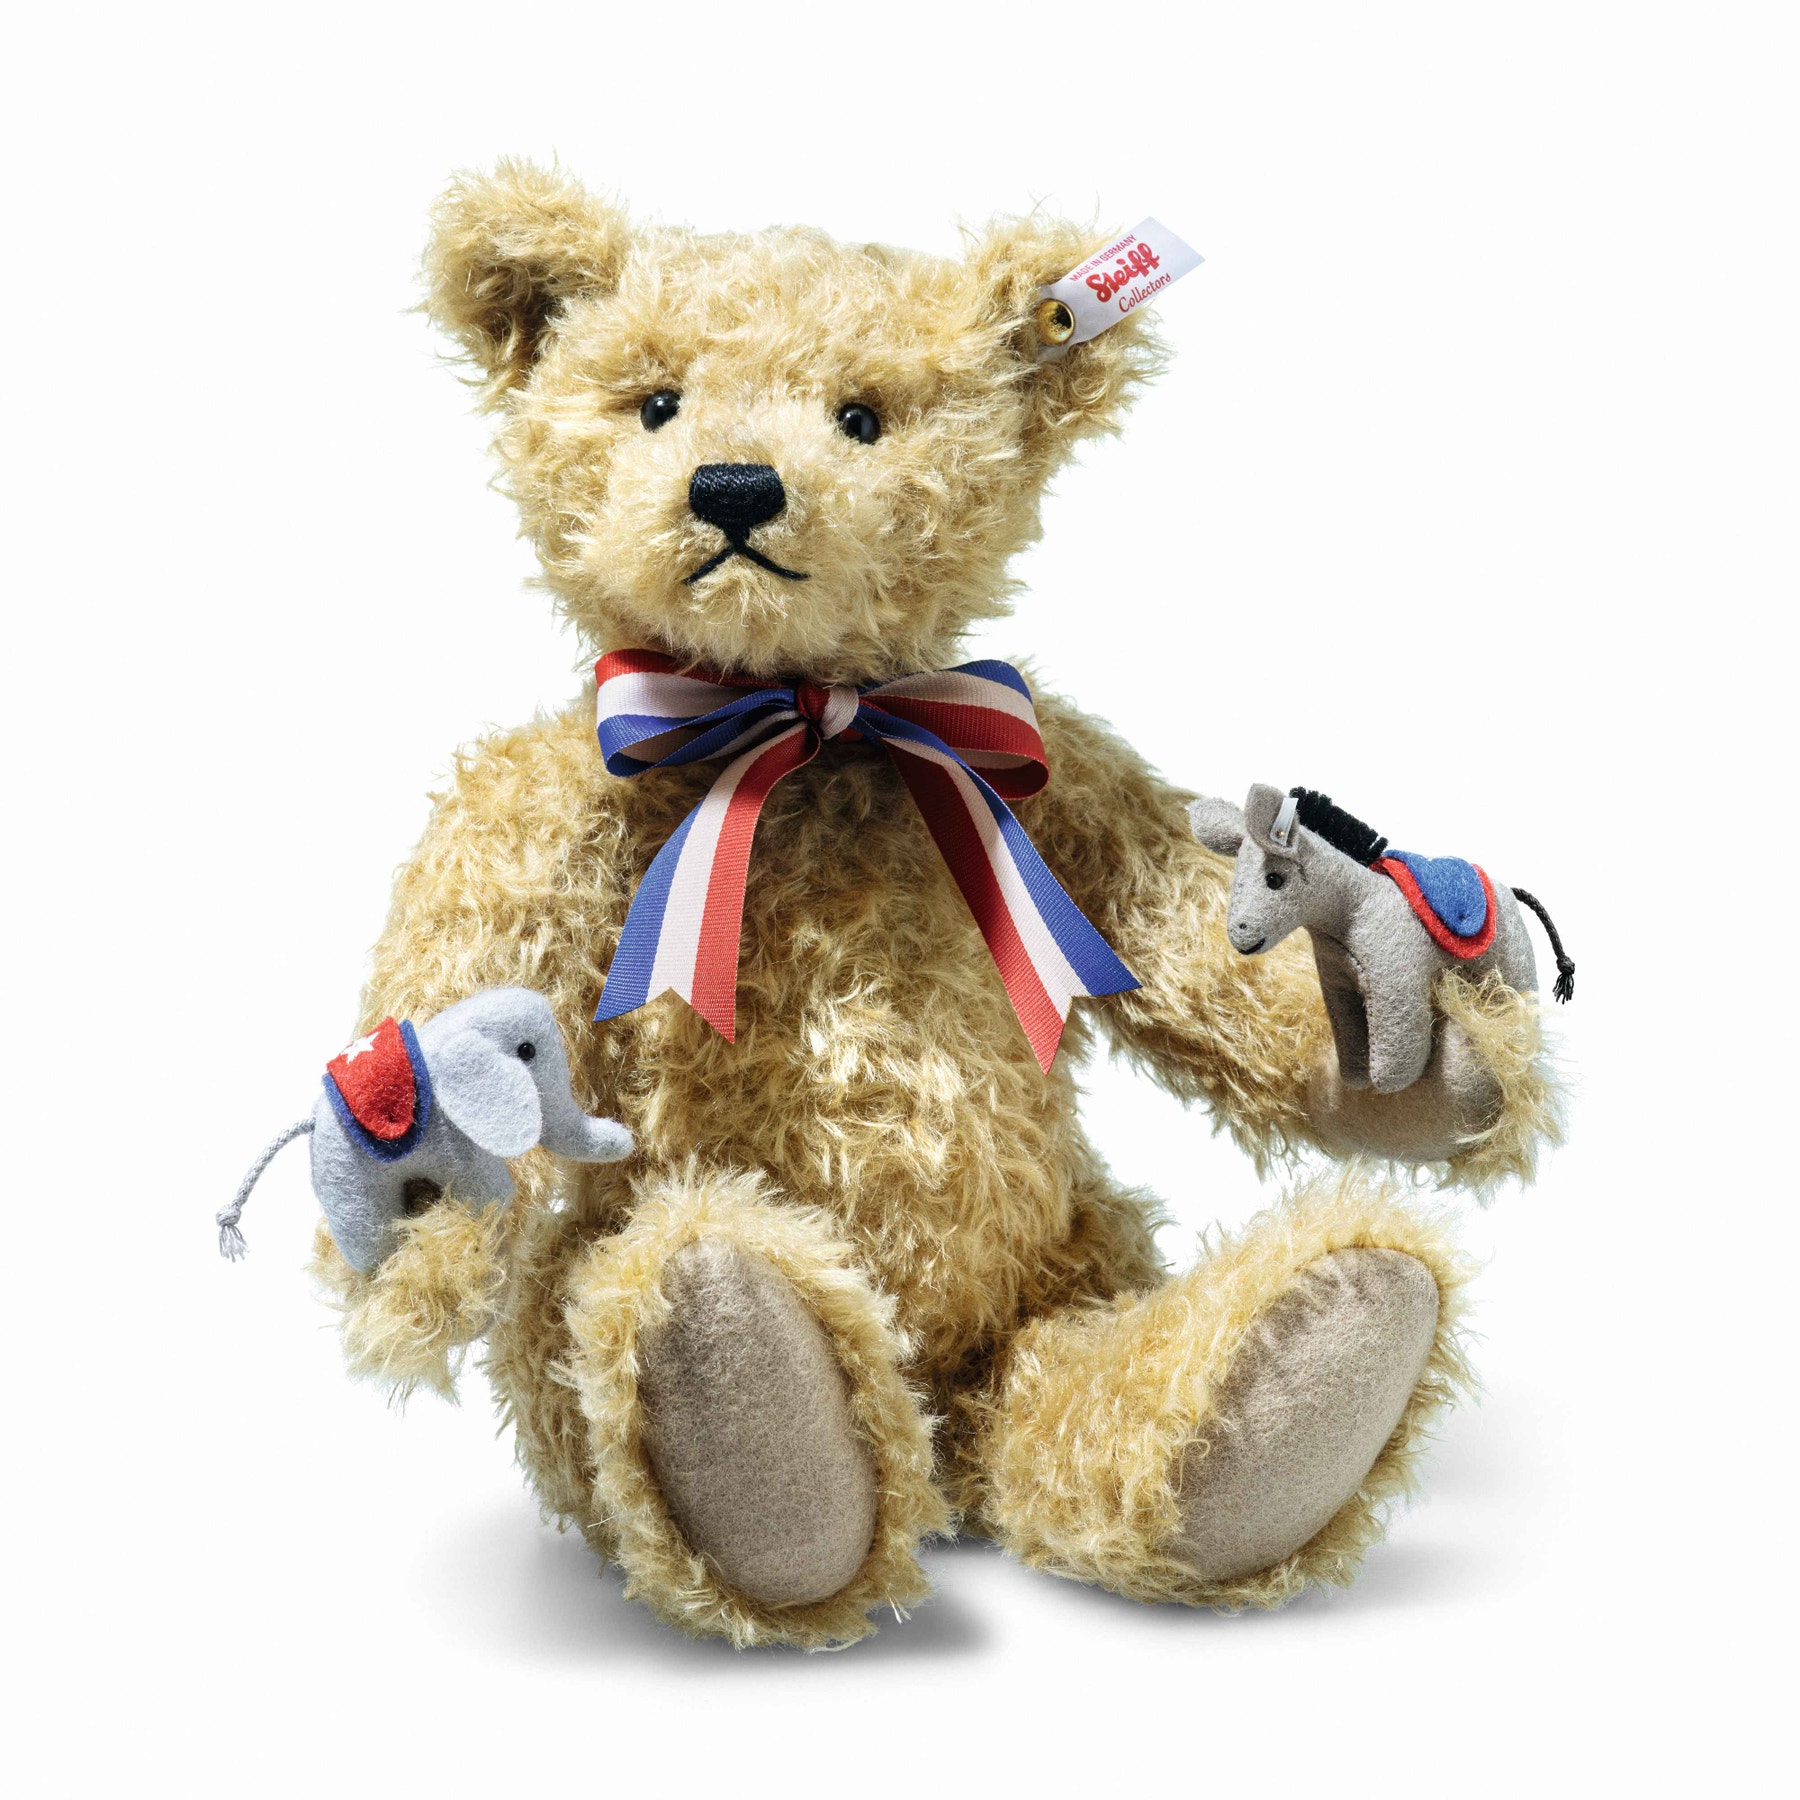 Great American “Unity” Teddy Bear with Elephant and Donkey